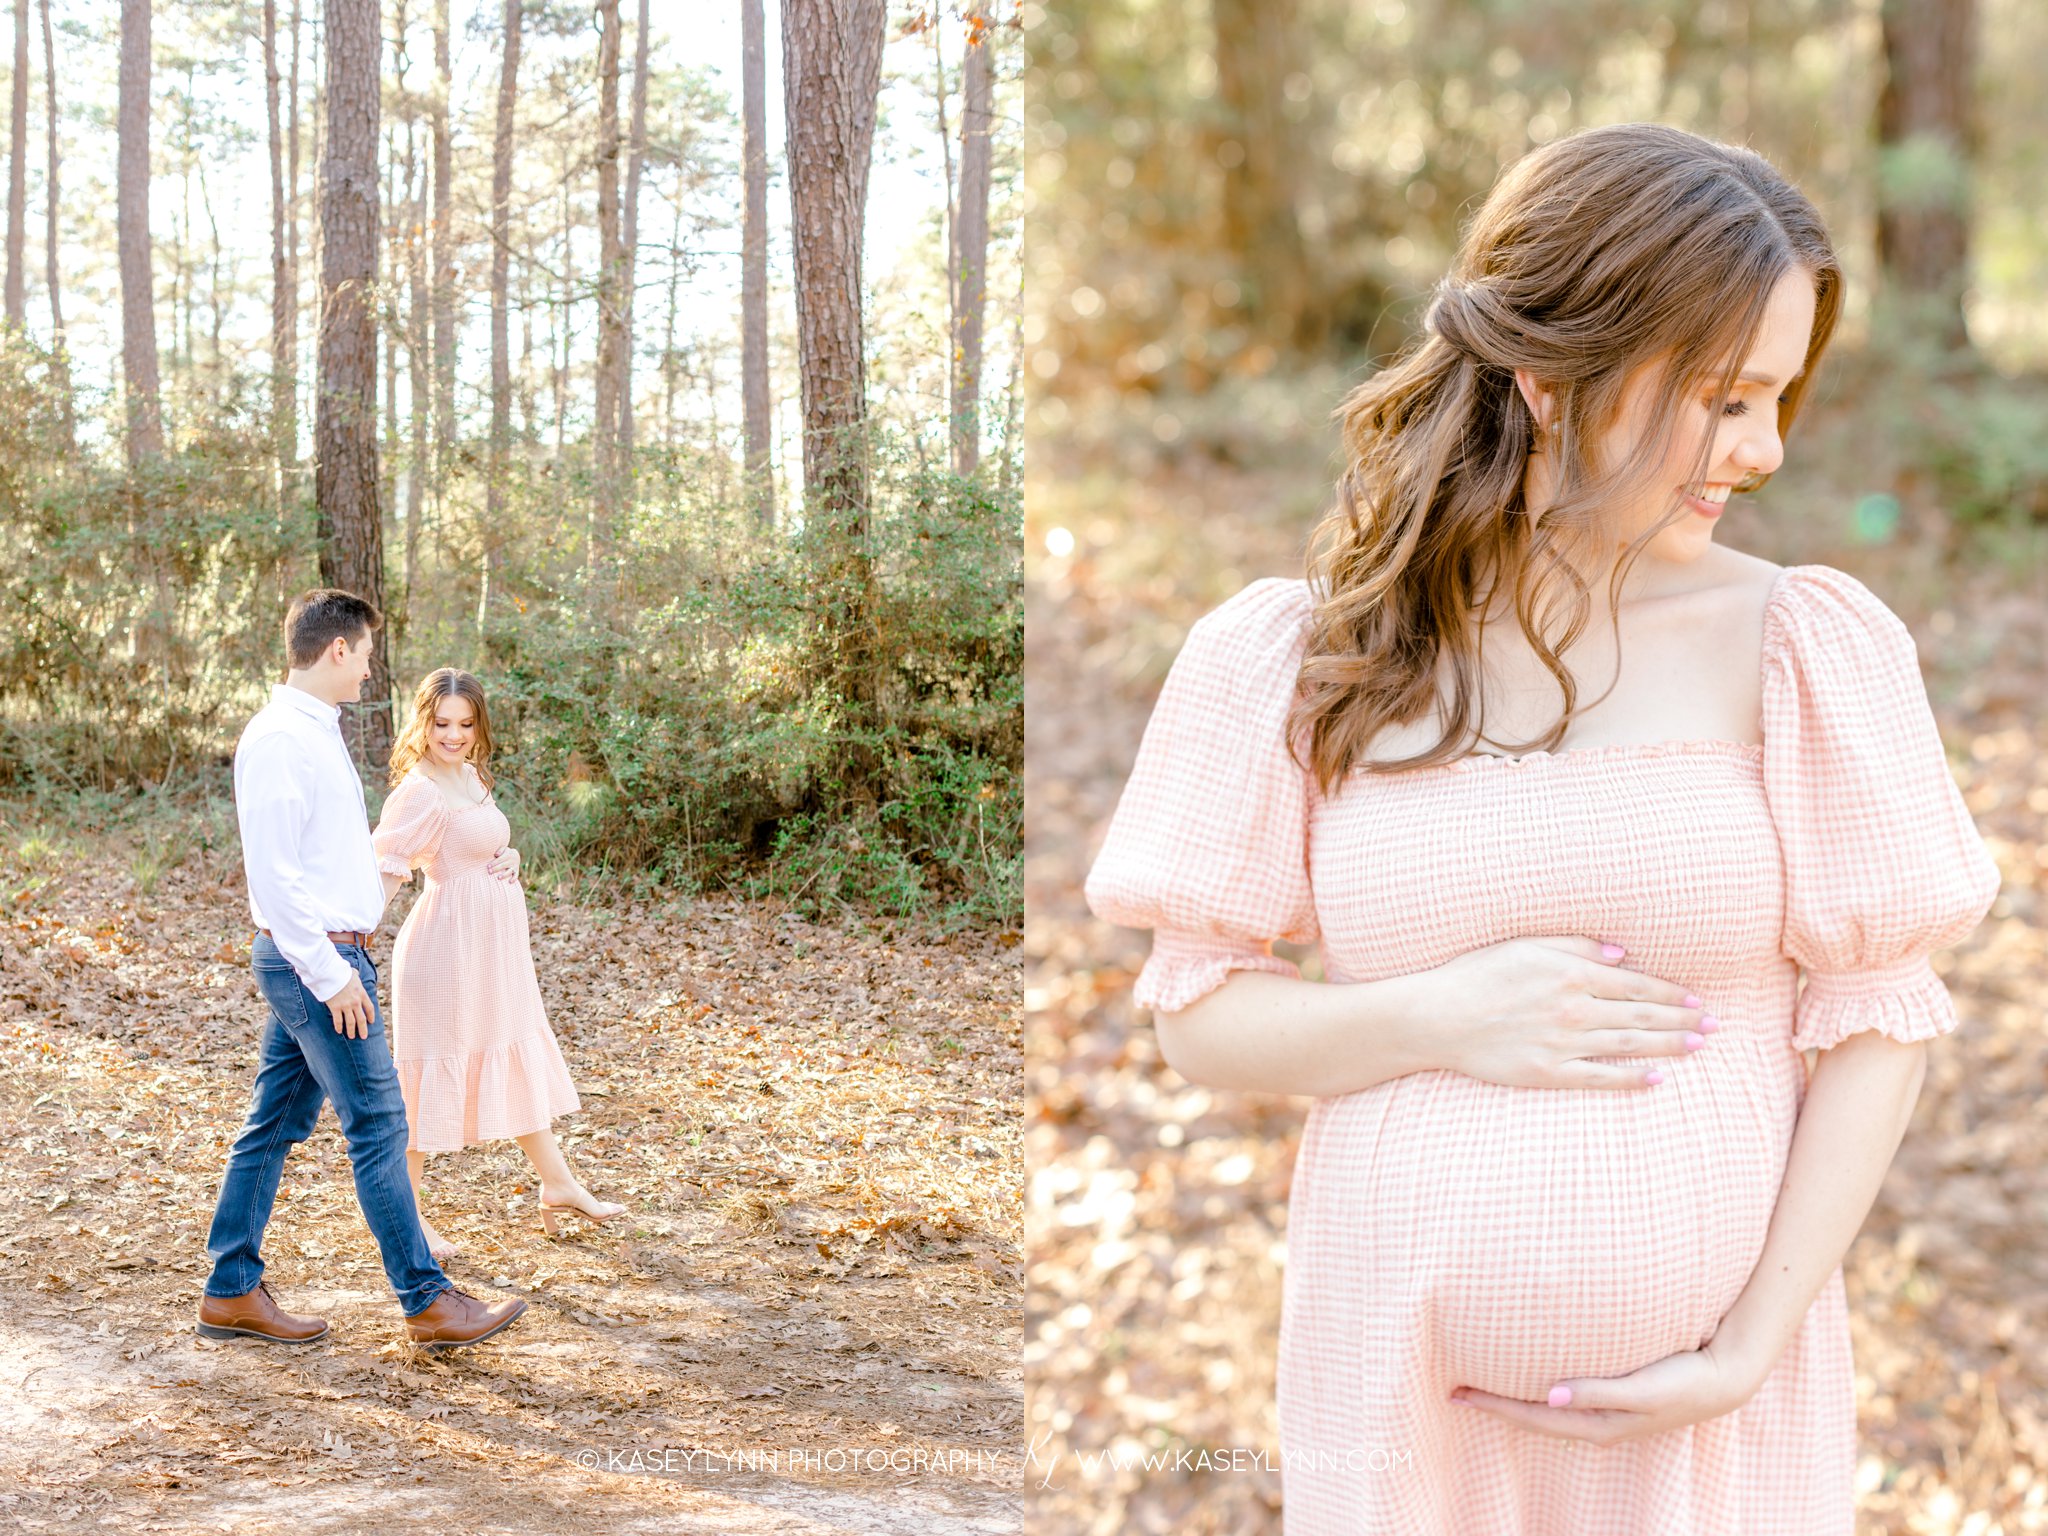 The Woodlands Maternity Session / Kasey Lynn Photography